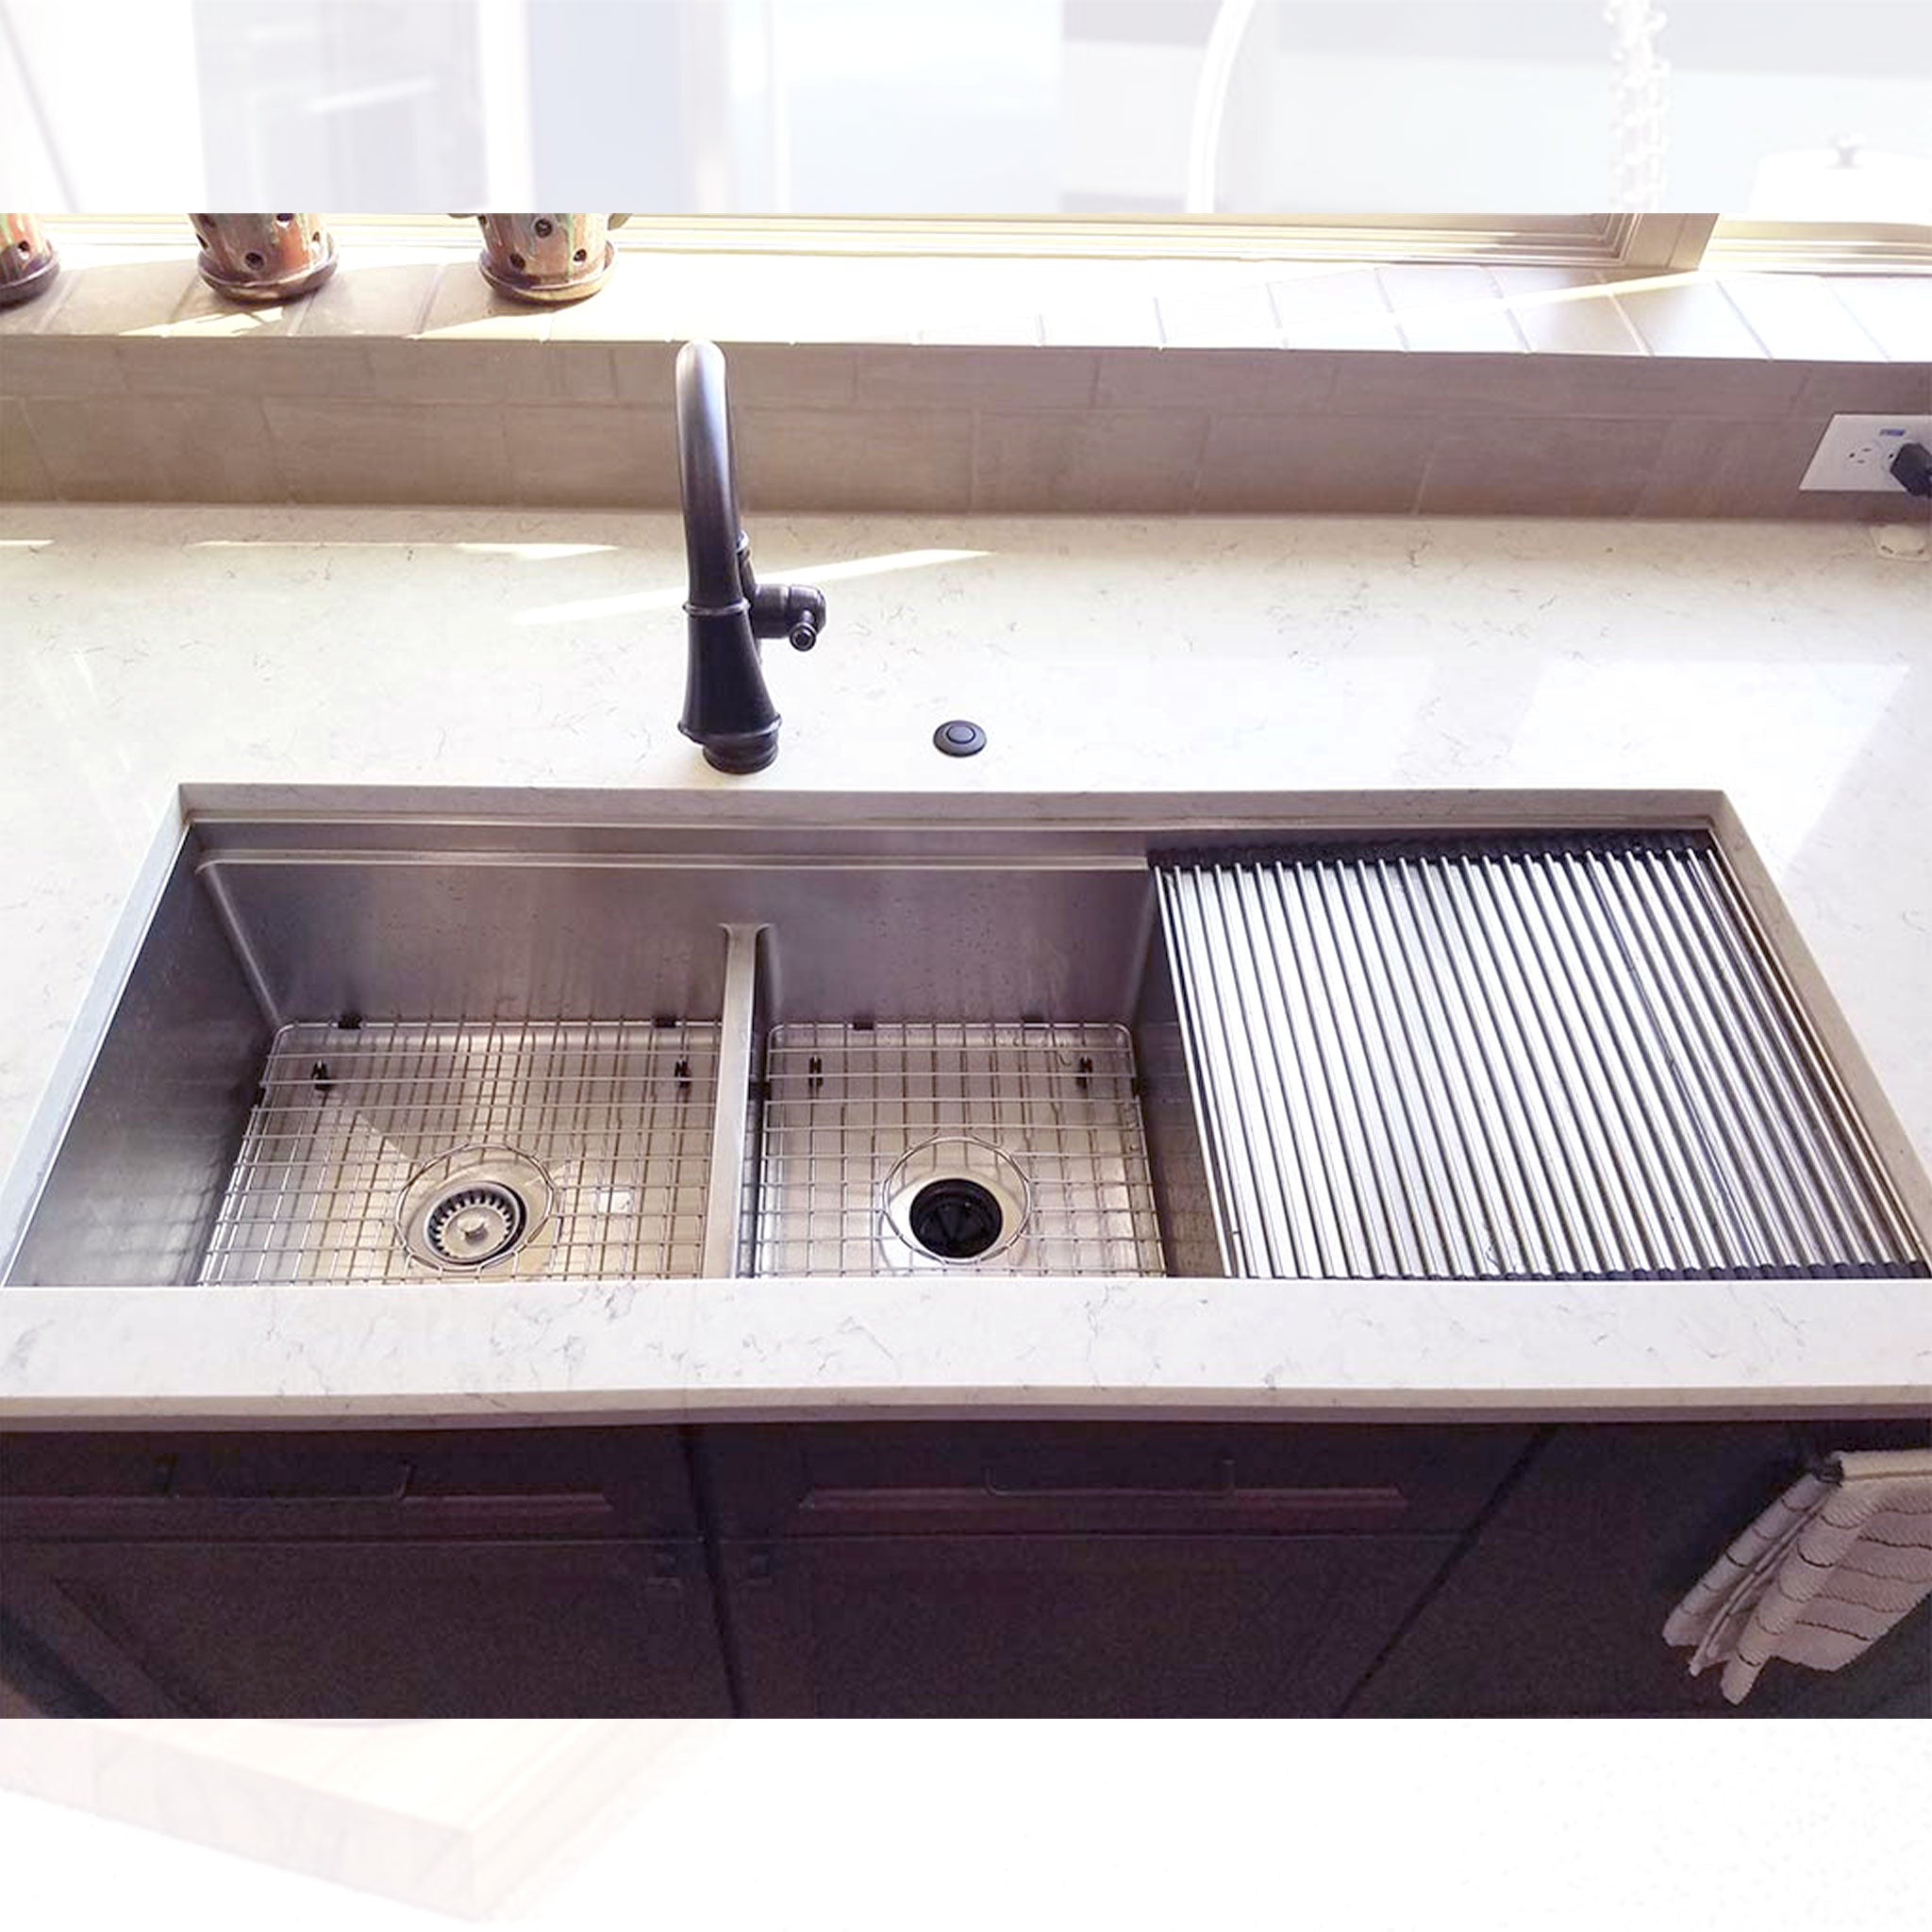 Overhead installation view of dual basin workstation kitchen sink 50 inches in width